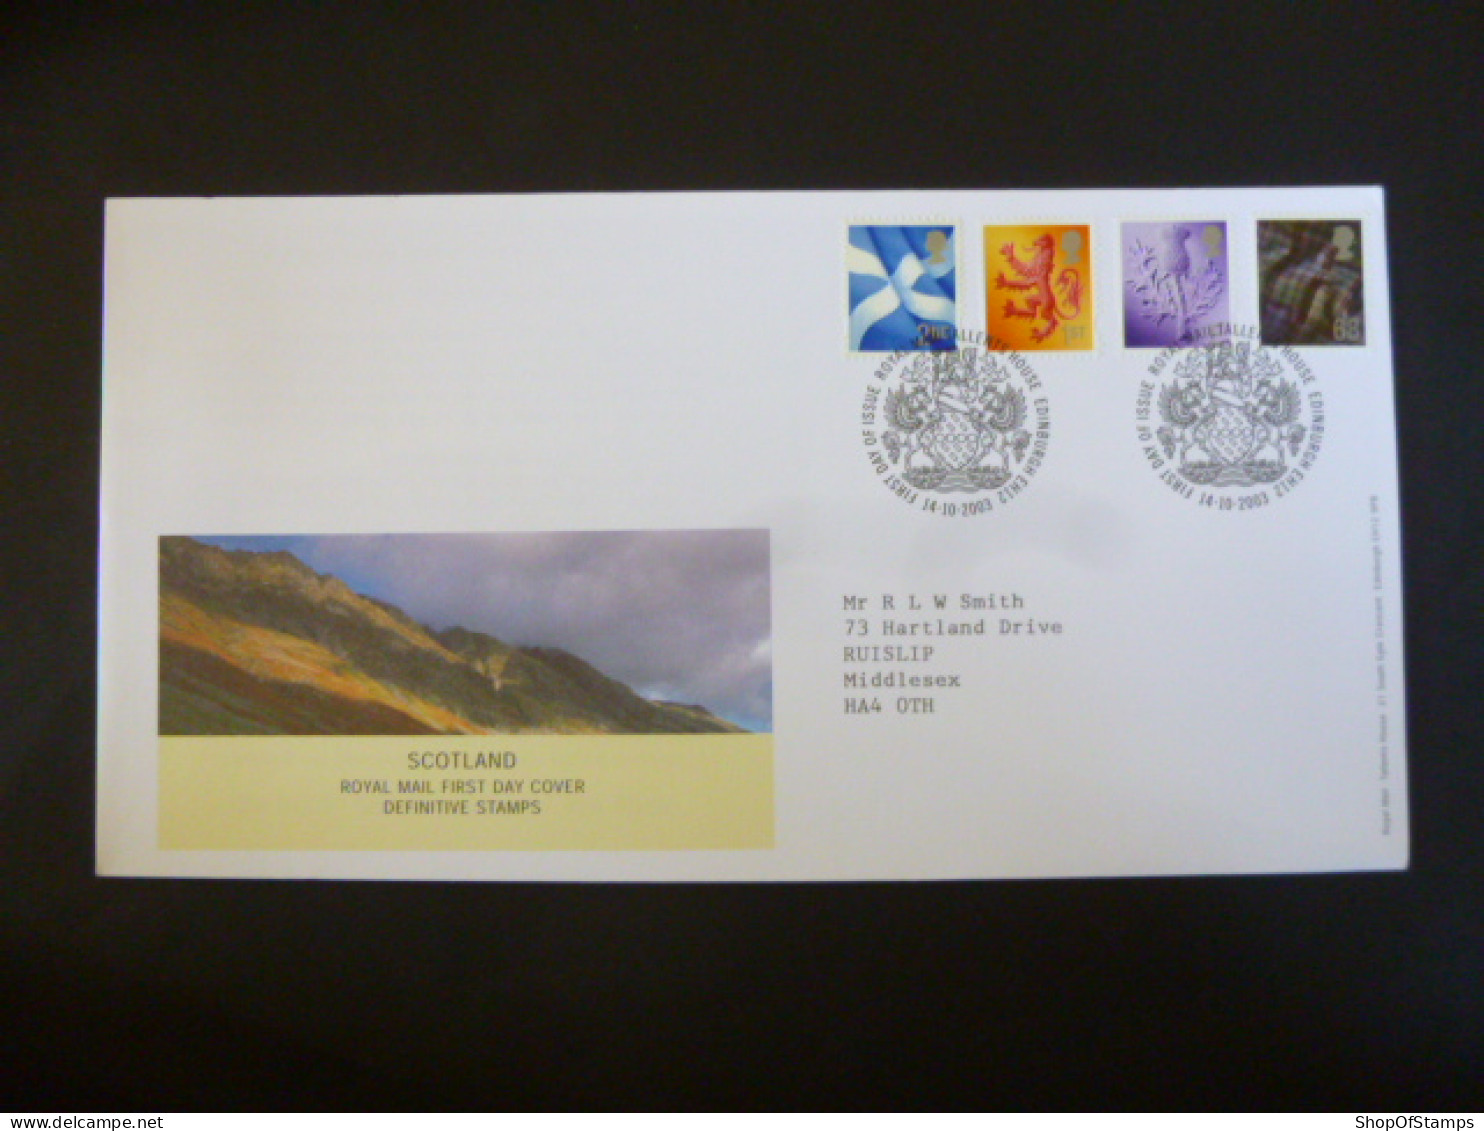 GREAT BRITAIN SG S109-111 & S117 FDC ROYAL MAIL TALENT HOUSE EDINBURGH - Unclassified